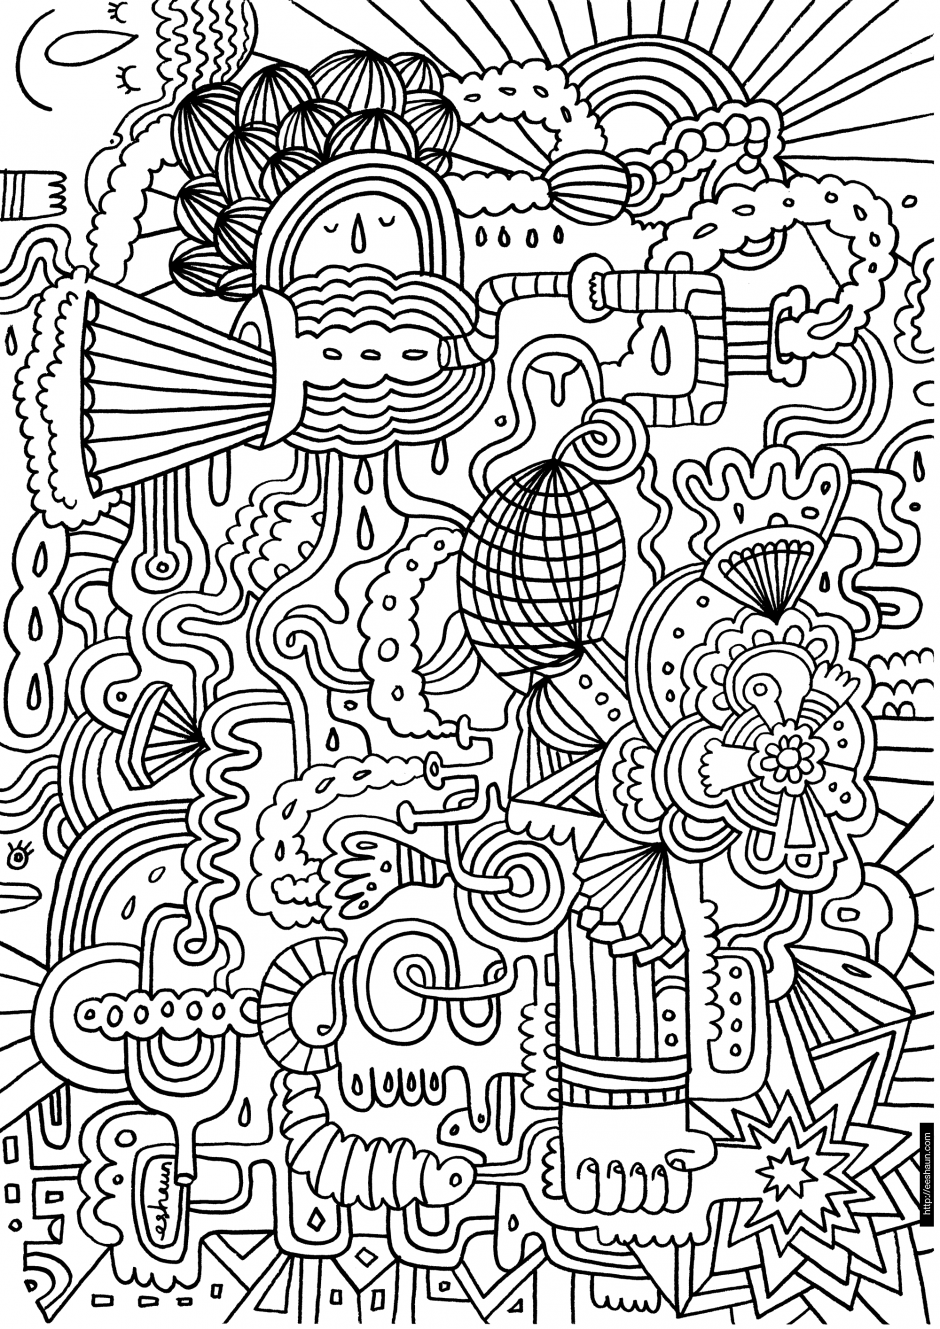 teenager-coloring-page-0001-q1